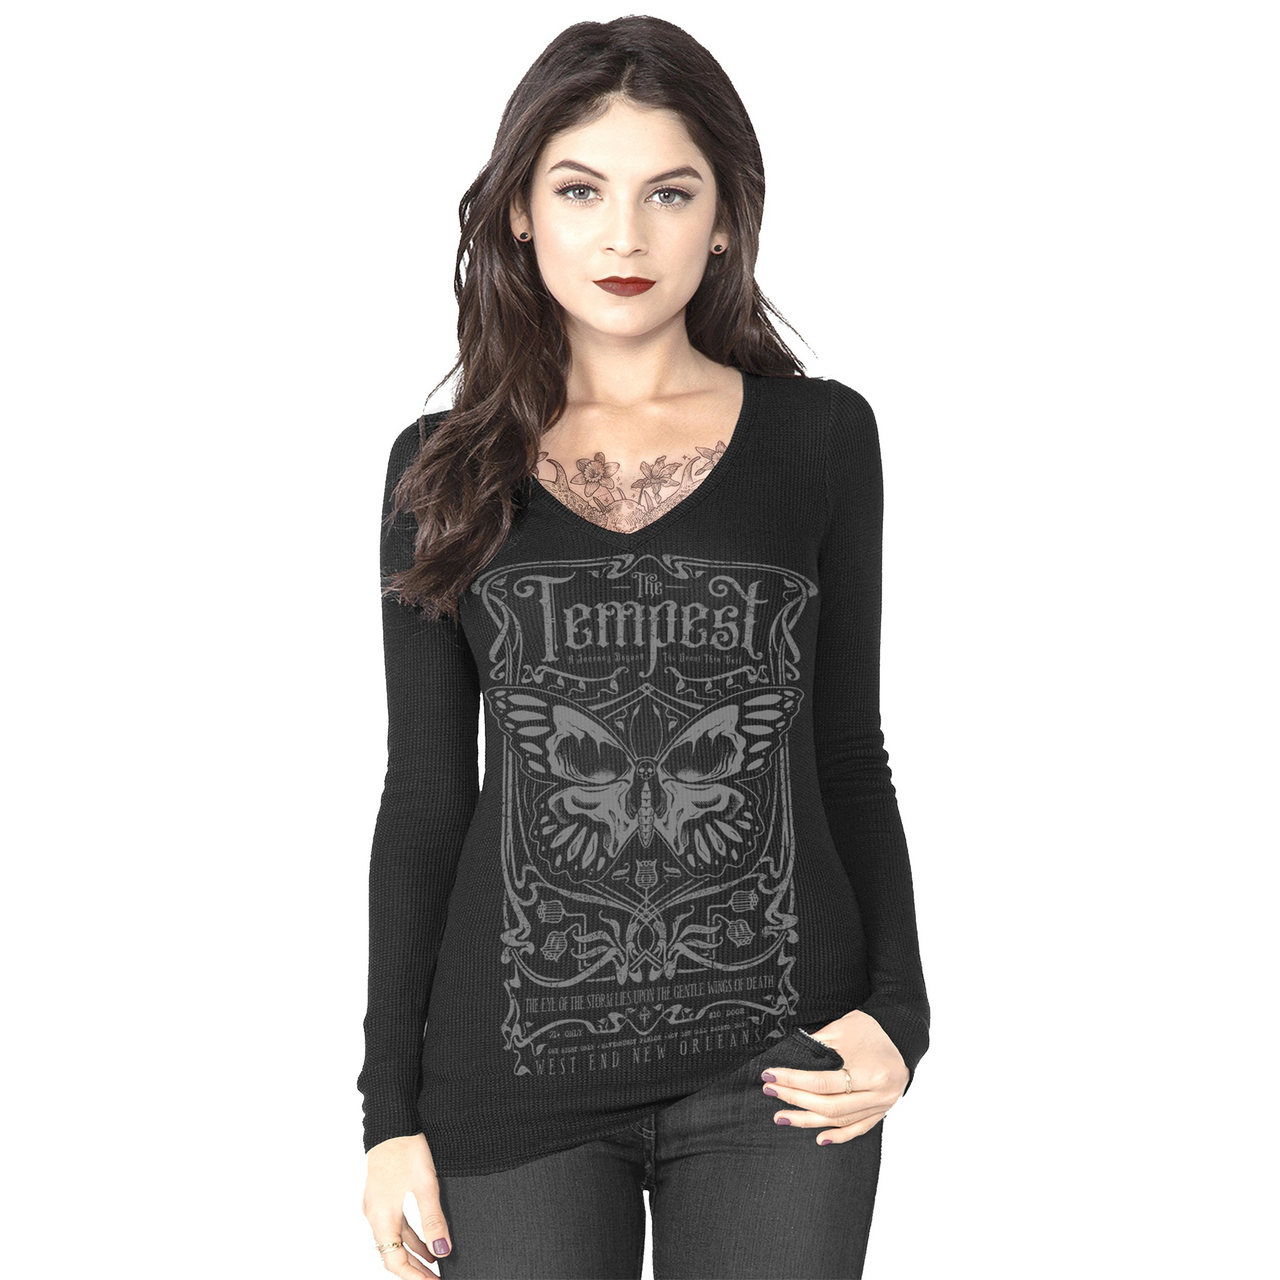 SERPENTINE THE TEMPEST WOMENS THERMAL TEE